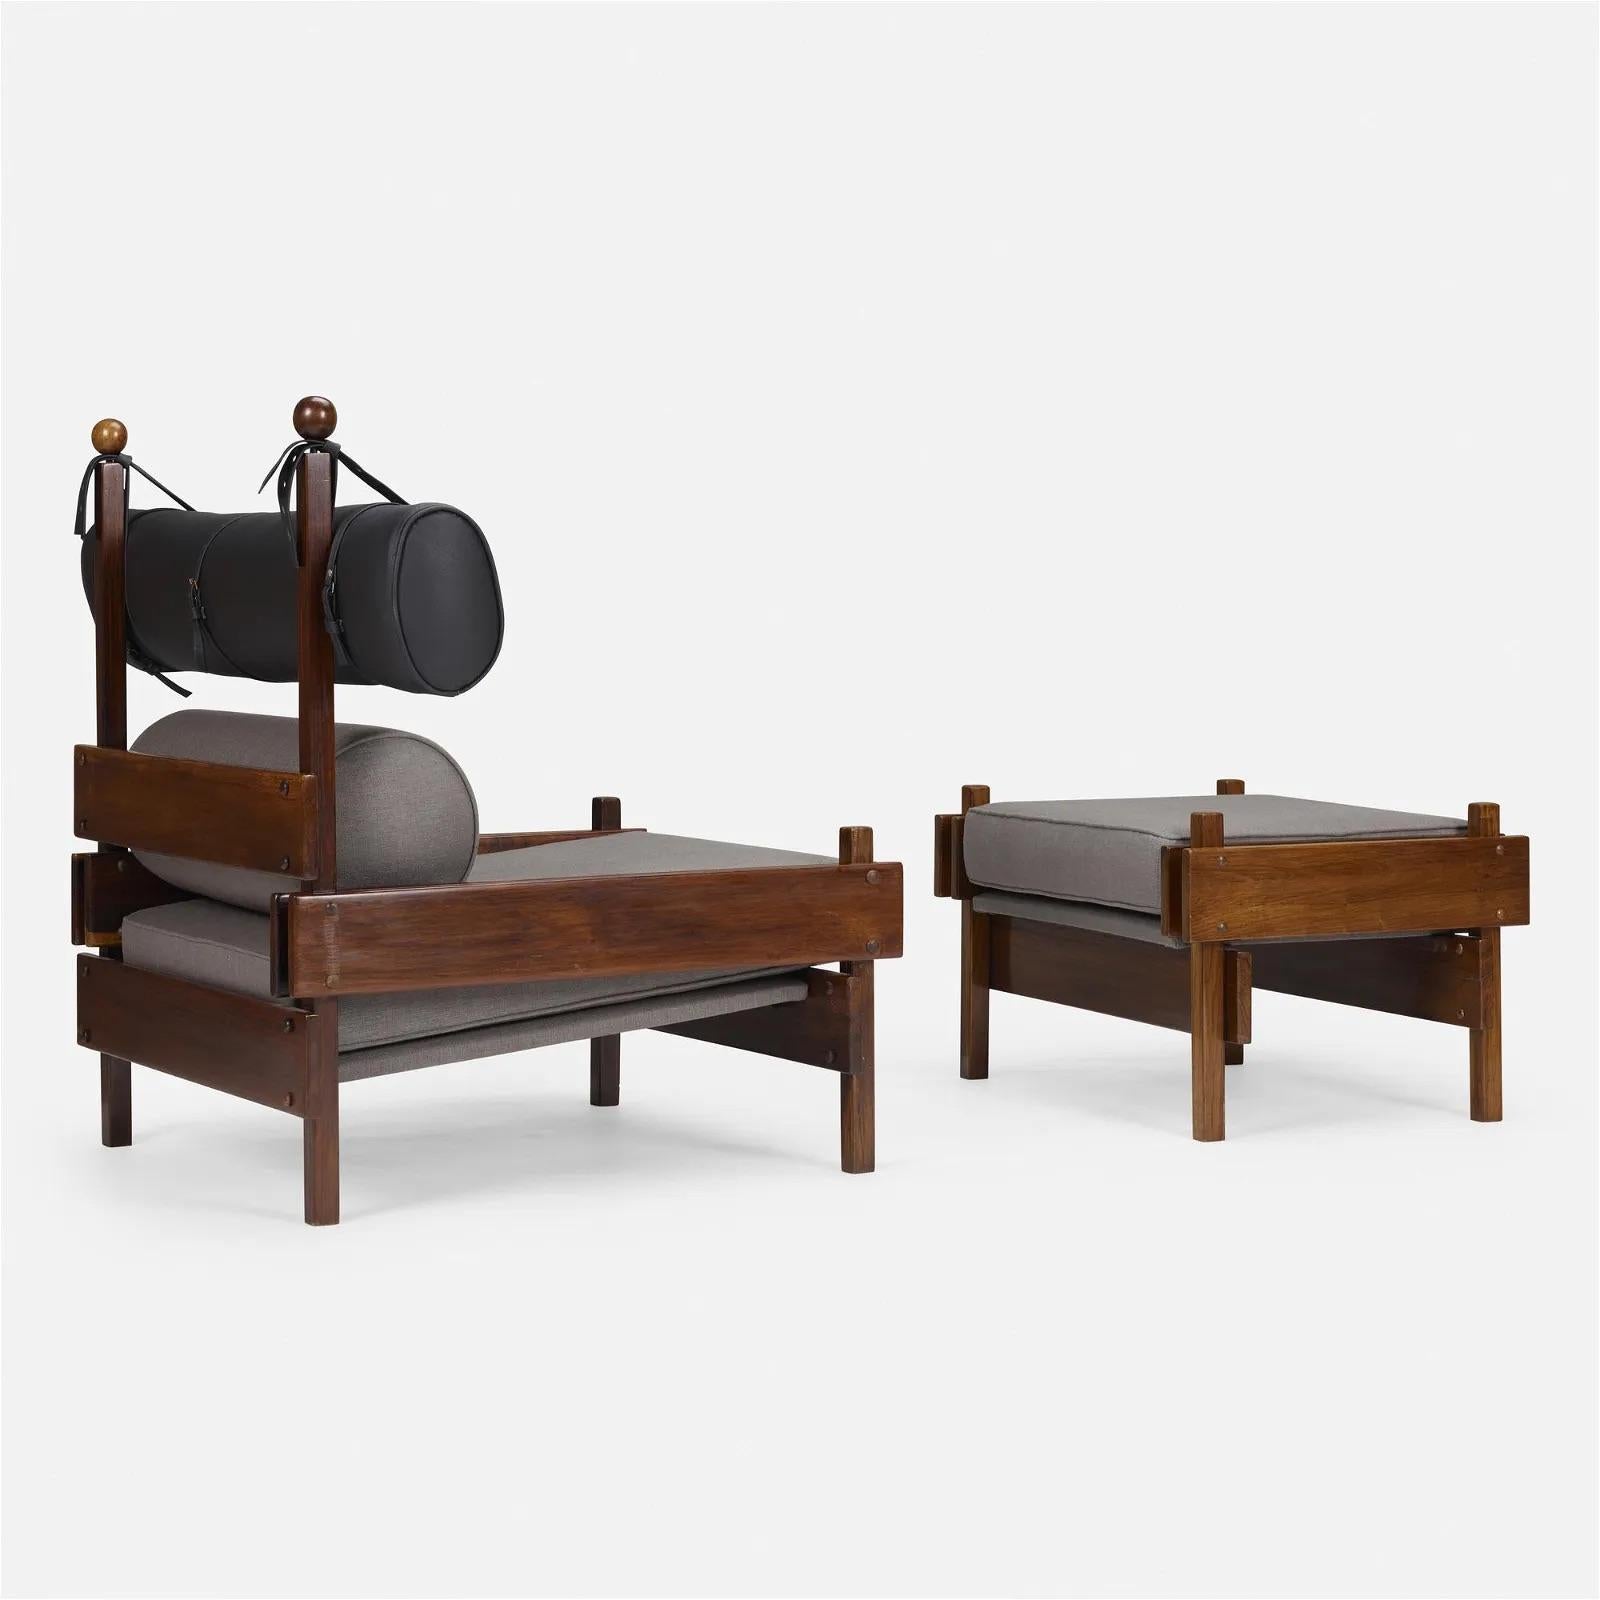 Wool Sergio Rodrigues Tonico Lounge Chairs with Ottomans, 1960s Brazil For Sale